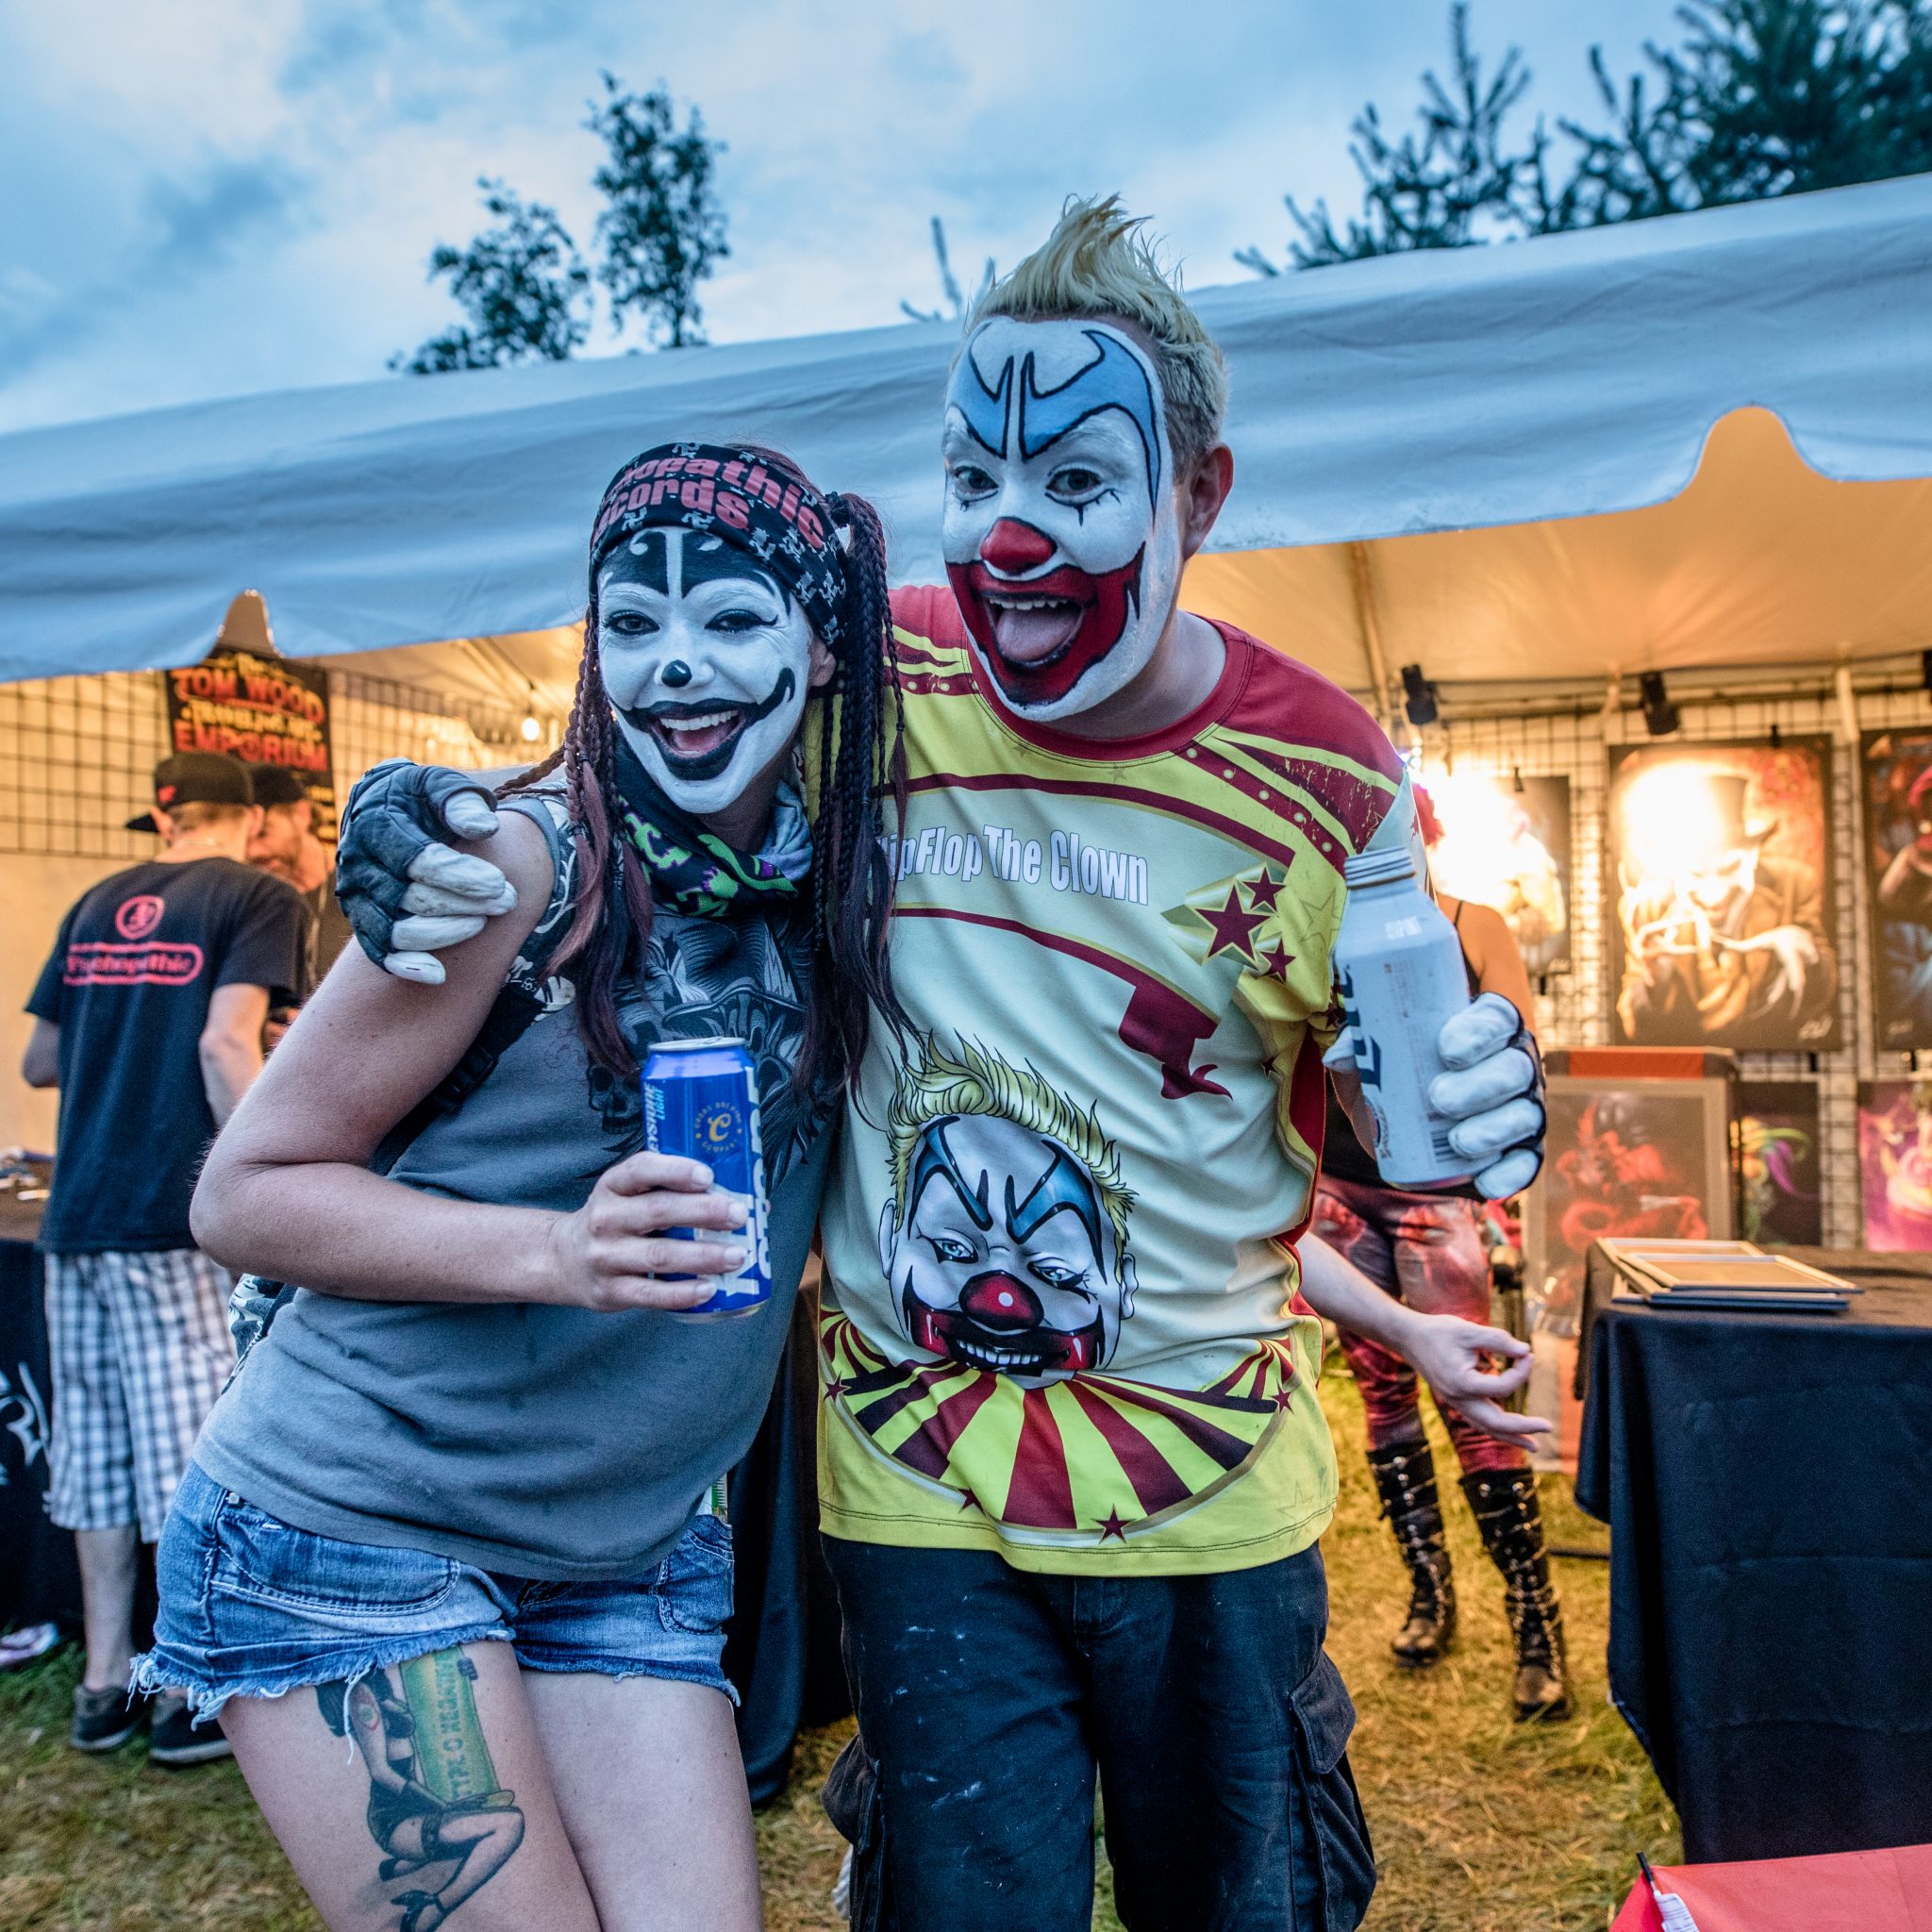 2018 Gathering of the Juggalos ⋆ FlipFlop The Clown